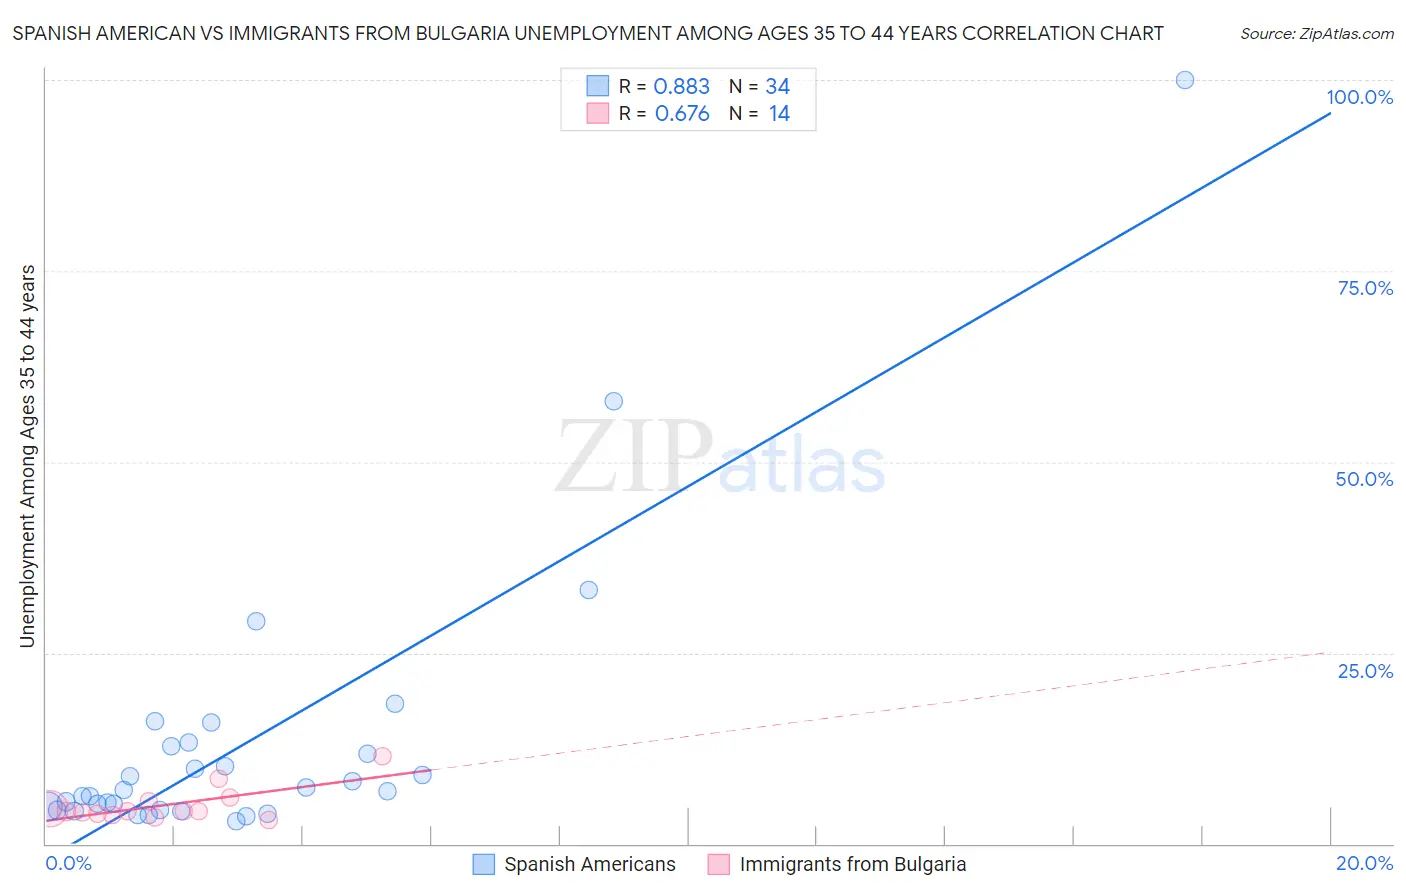 Spanish American vs Immigrants from Bulgaria Unemployment Among Ages 35 to 44 years